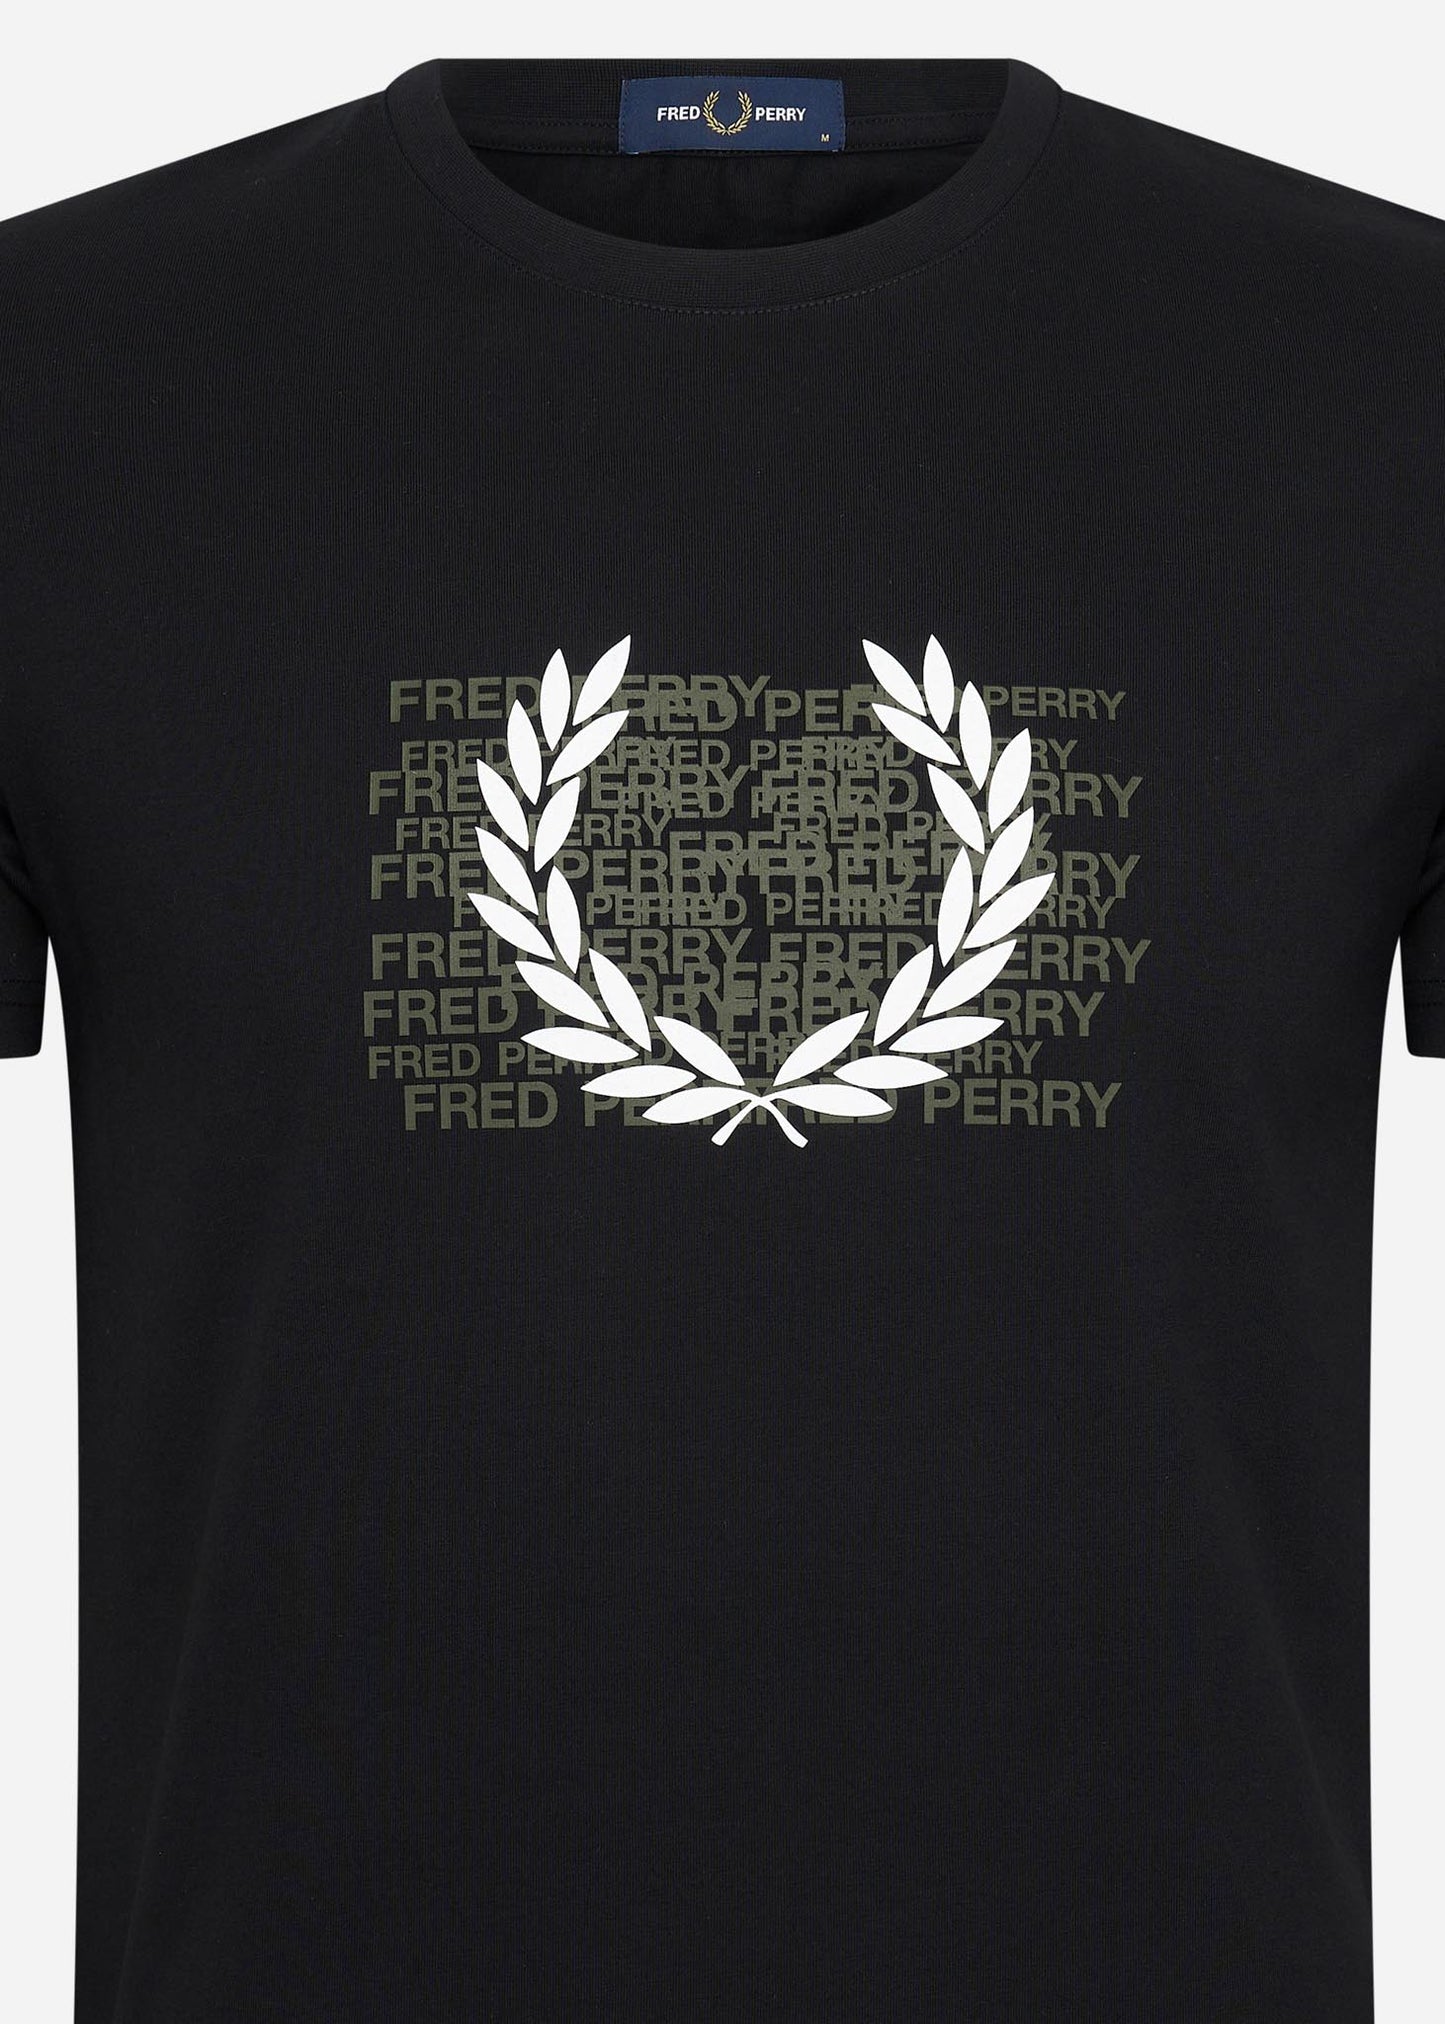 Fred perry graphic t-shirt - black